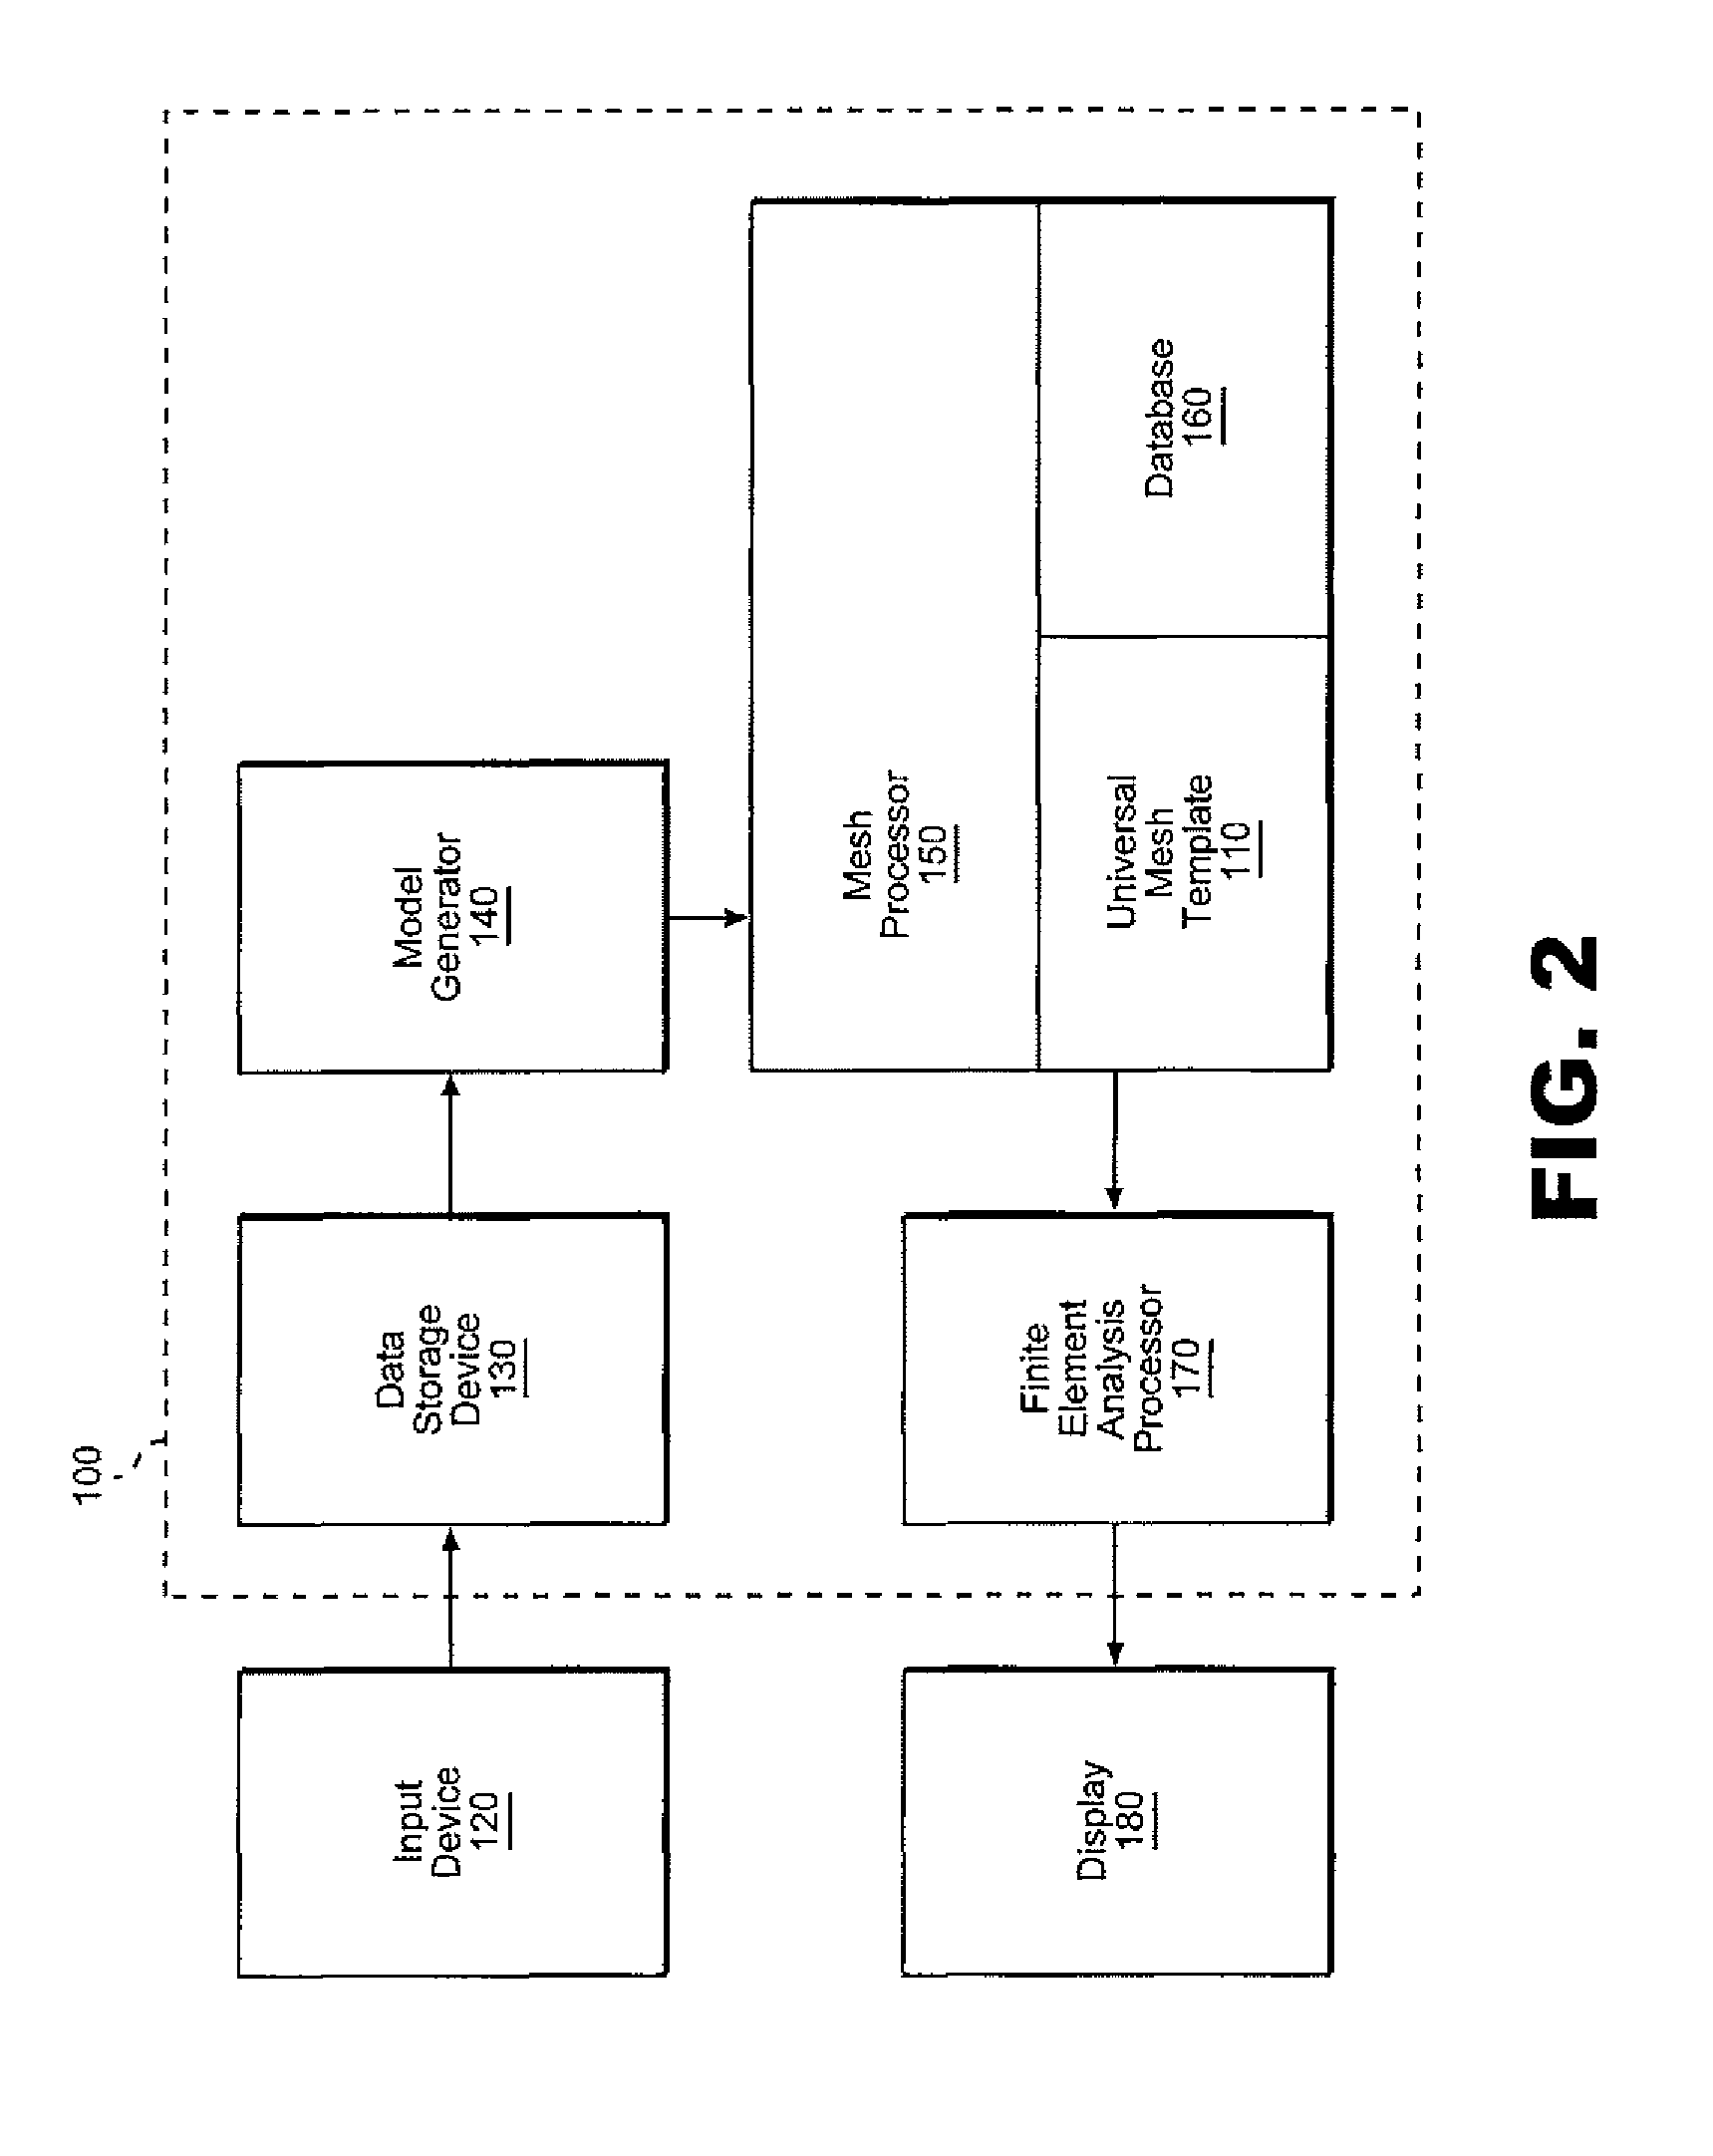 System and method for performing thermal analysis on a building through universal meshing